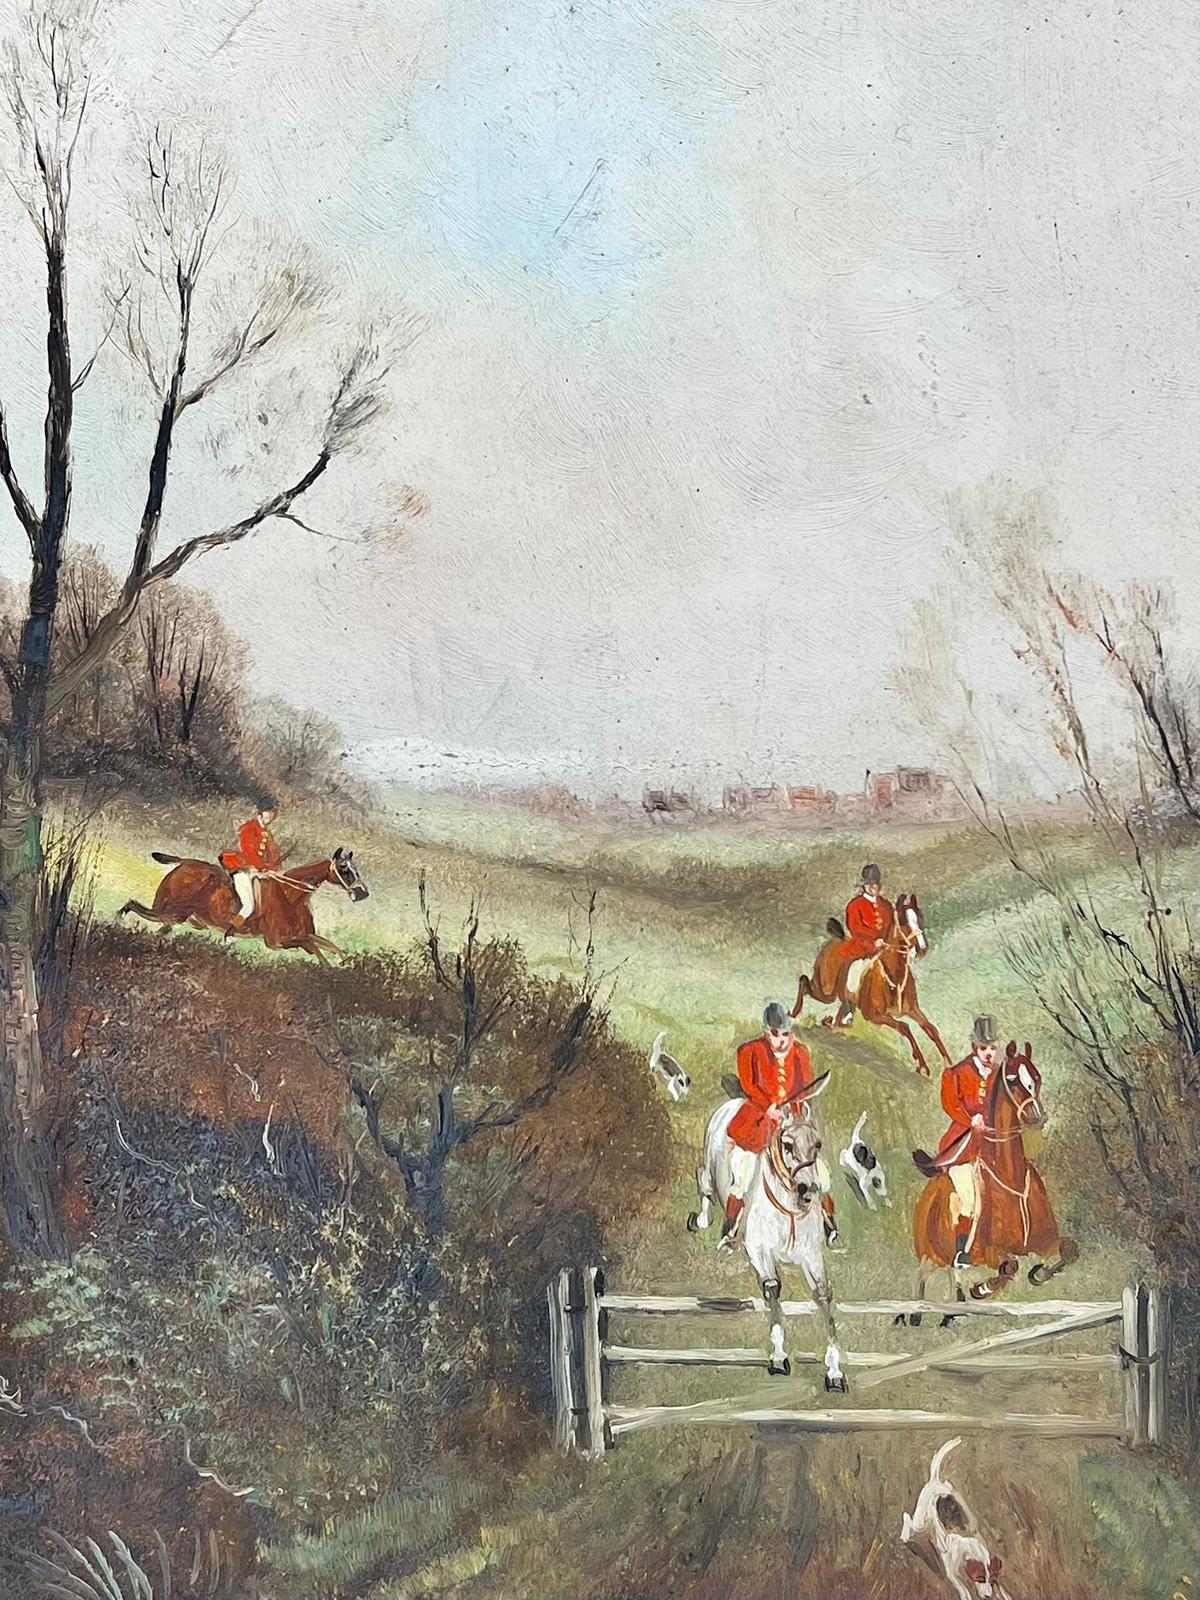 Superb oil painting by the very popular English sporting artist, Philip Rideout (circa 1850-1920). 

signed oil on paper mounted in a frame
dated
framed: 16 x 13.75 inches
paper: 10 x 8 inches

Rideout is one of Englands most popular sporting